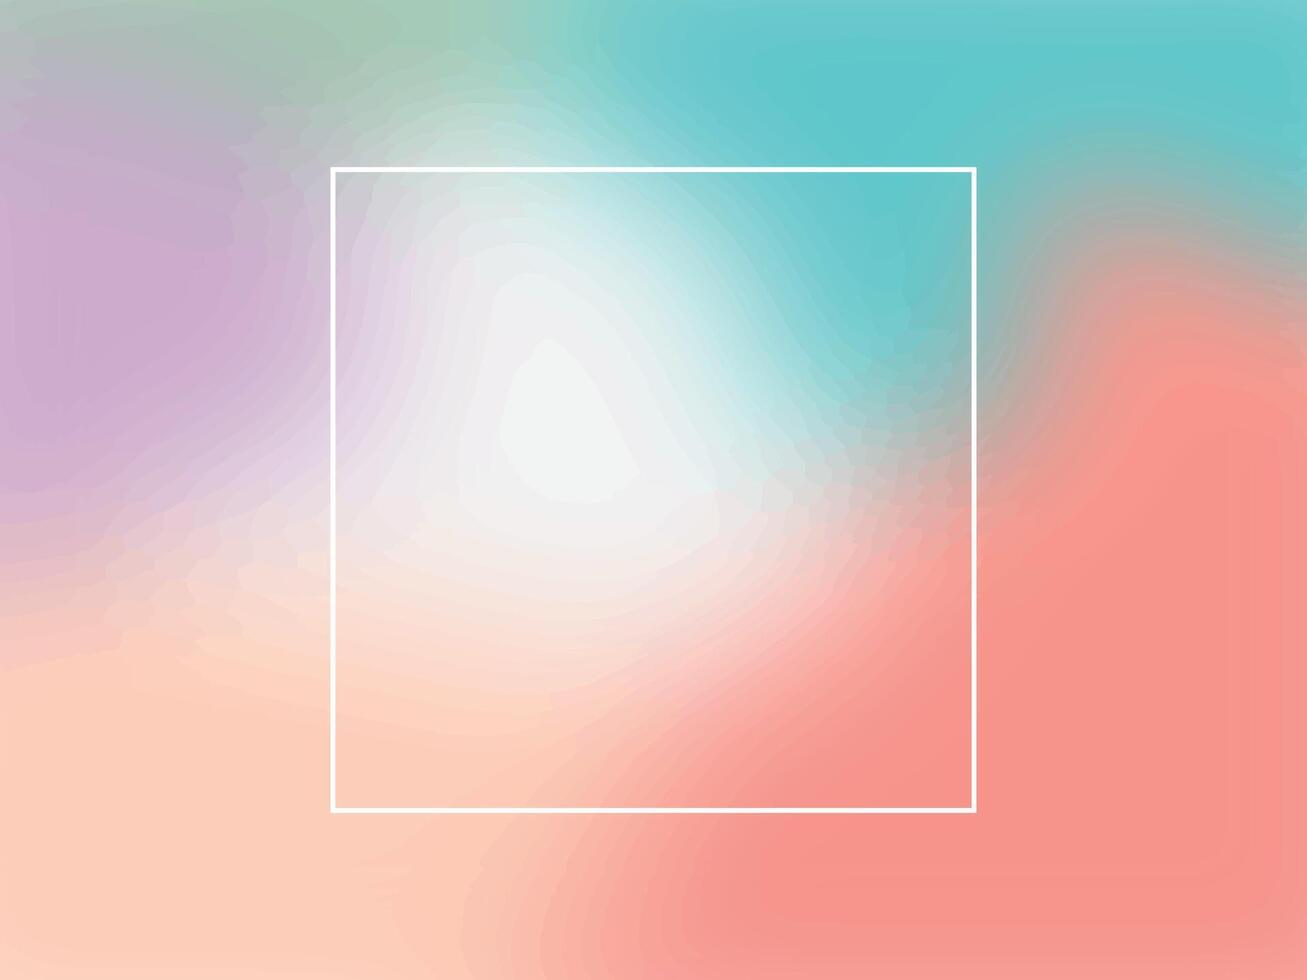 Abstract colorful blurred background vector